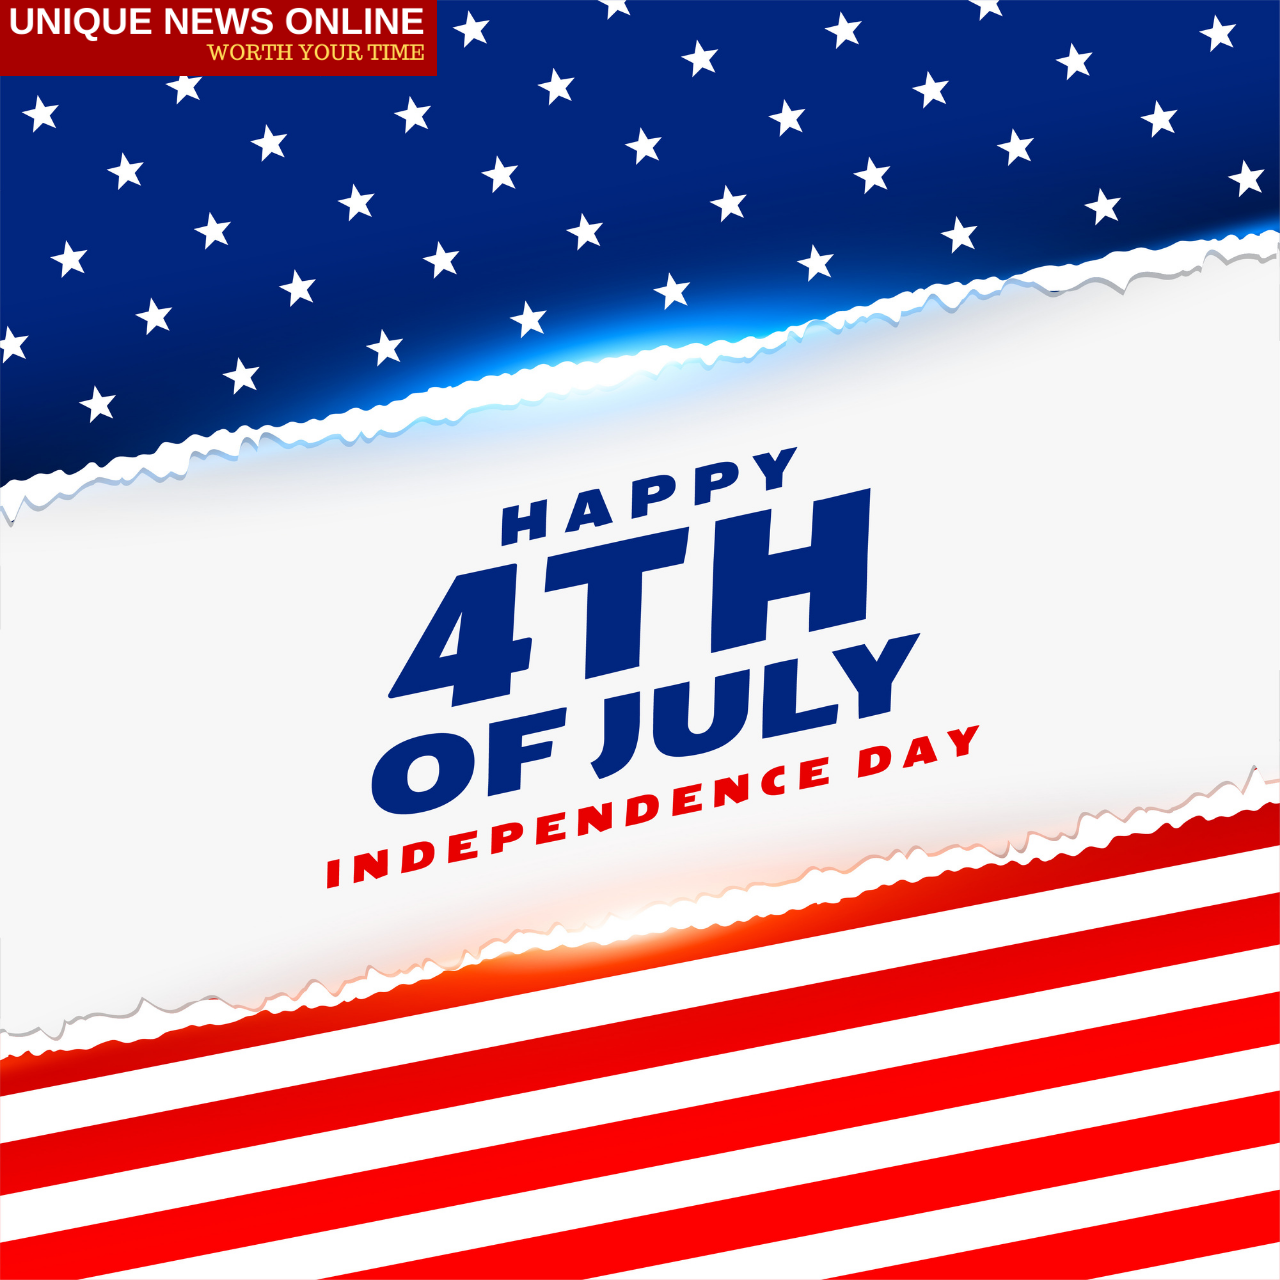 Independence Day (USA) 2021: Quotes, Wishes, Greetings, HD Images, Messages, Clipart, Wallpaper, and Gif to celebrate American Independence